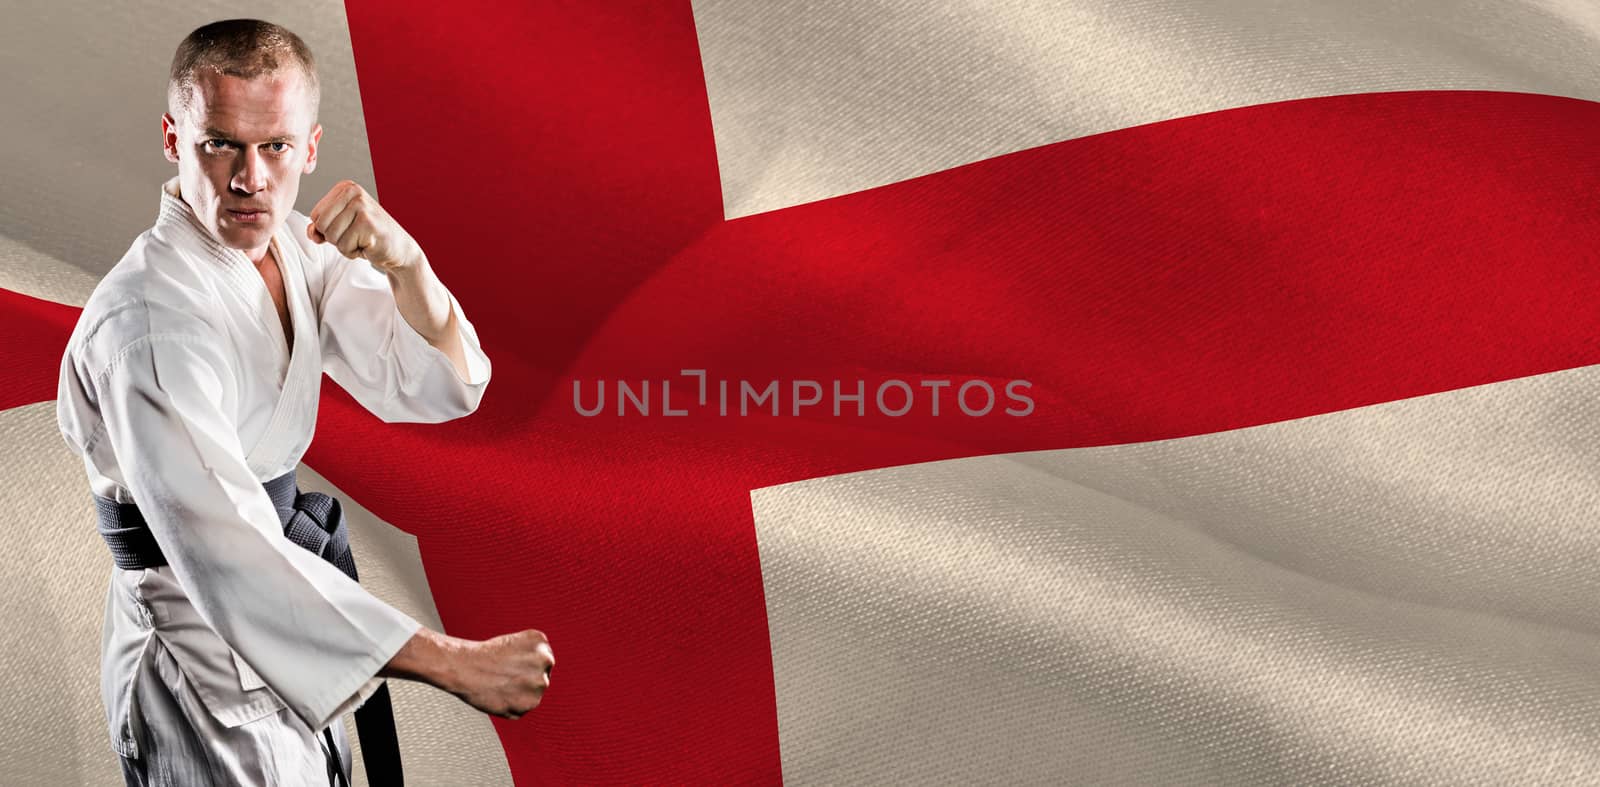 Fighter performing karate stance against digitally generated england national flag